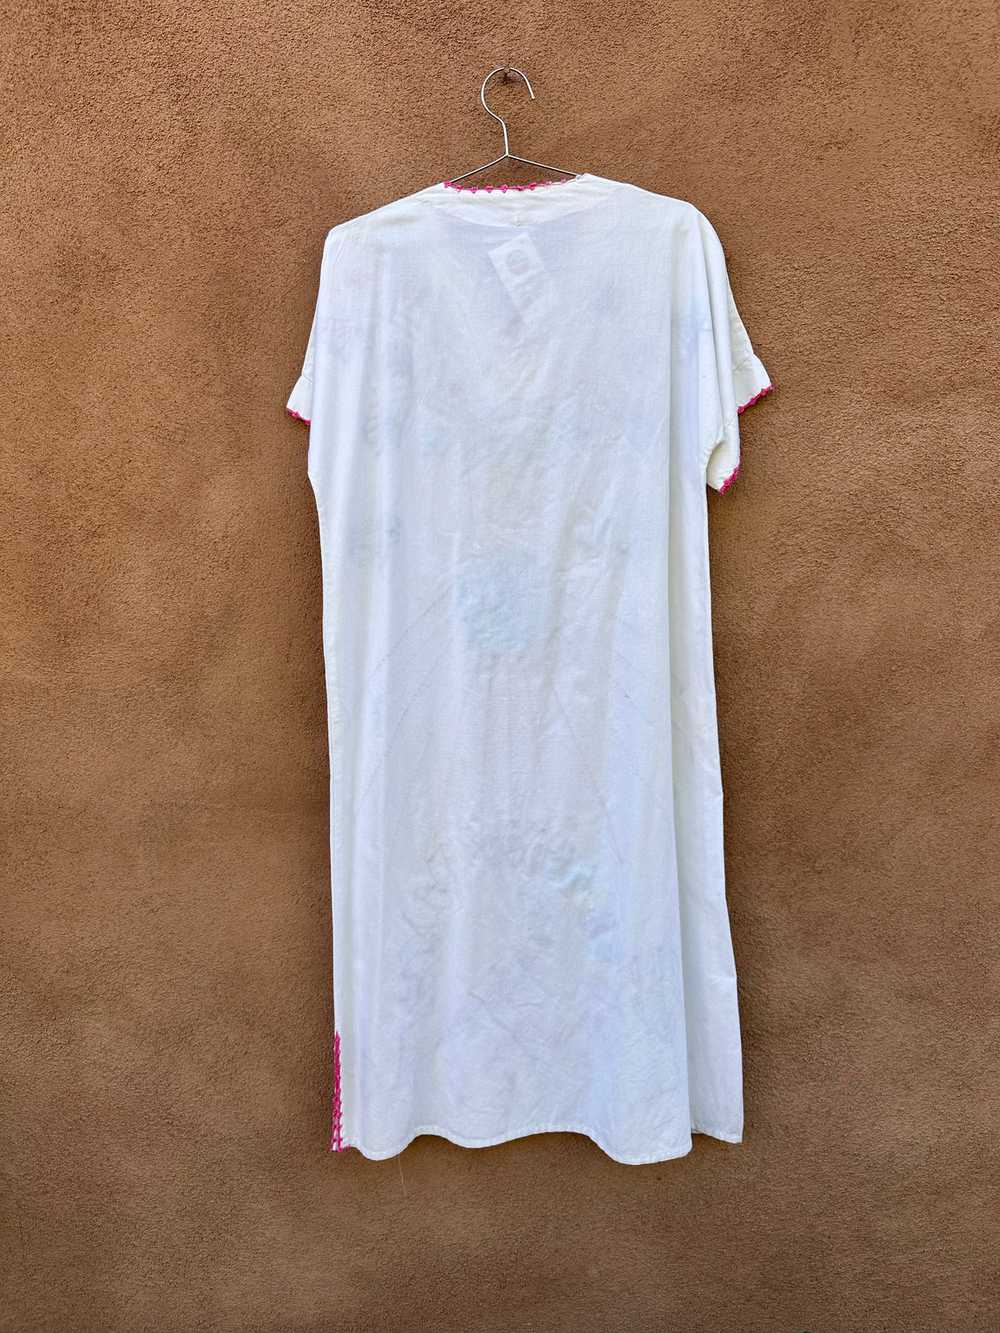 Long Embroidered Cotton Dress - image 4